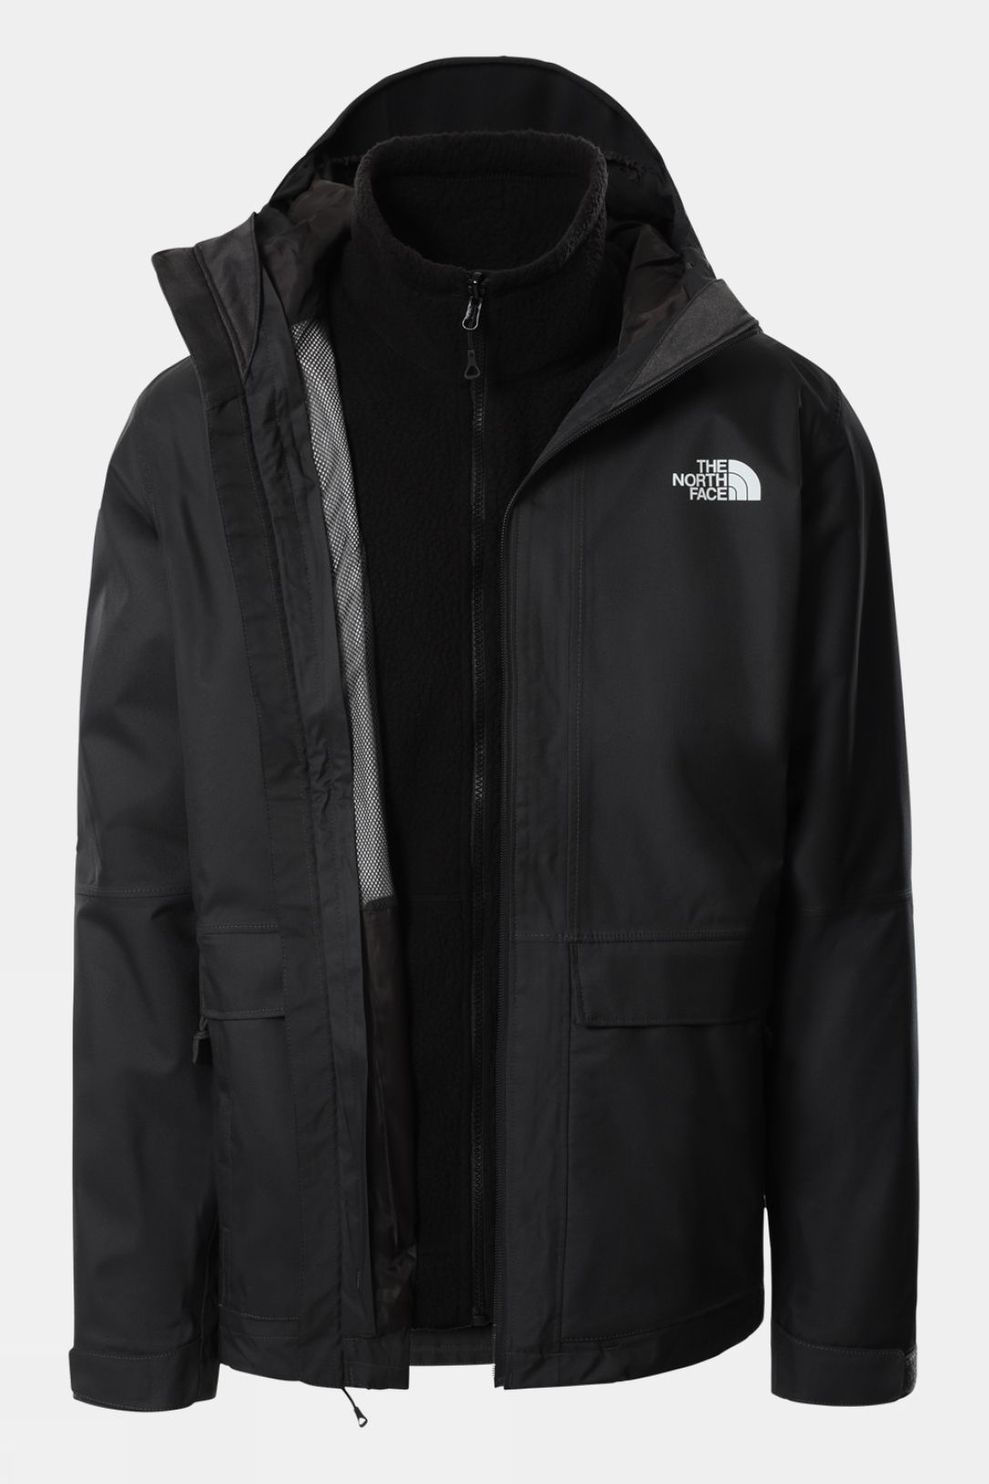 The North Face Mens New Fleece Inner Triclimate Jacket